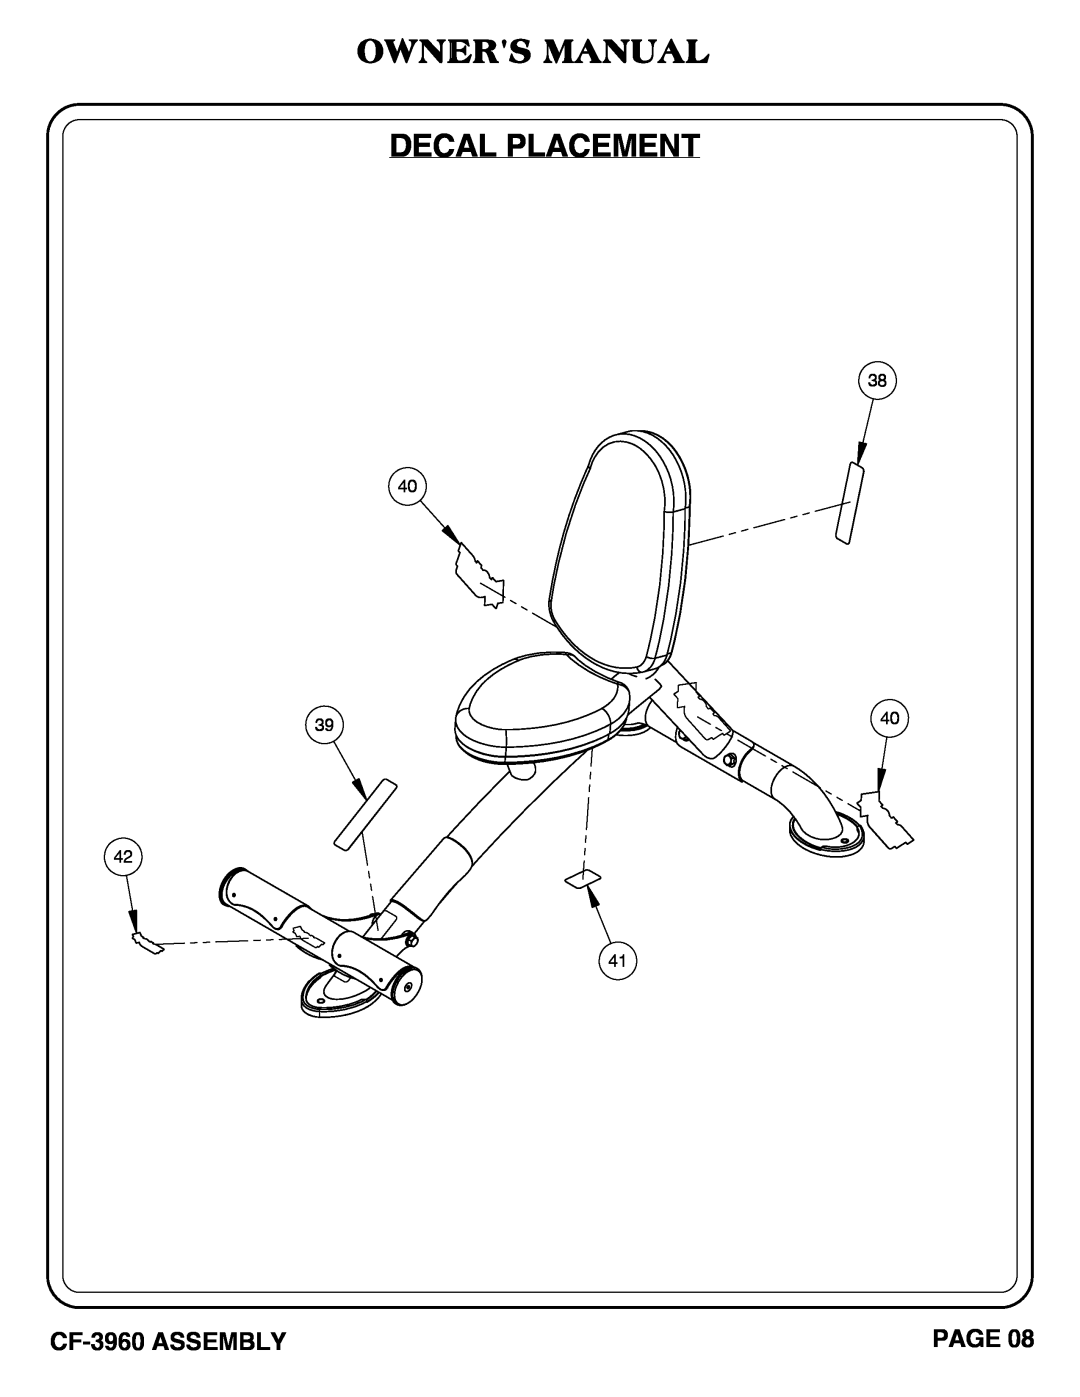 Hoist Fitness owner manual CF-3960 ASSEMBLY, Page 